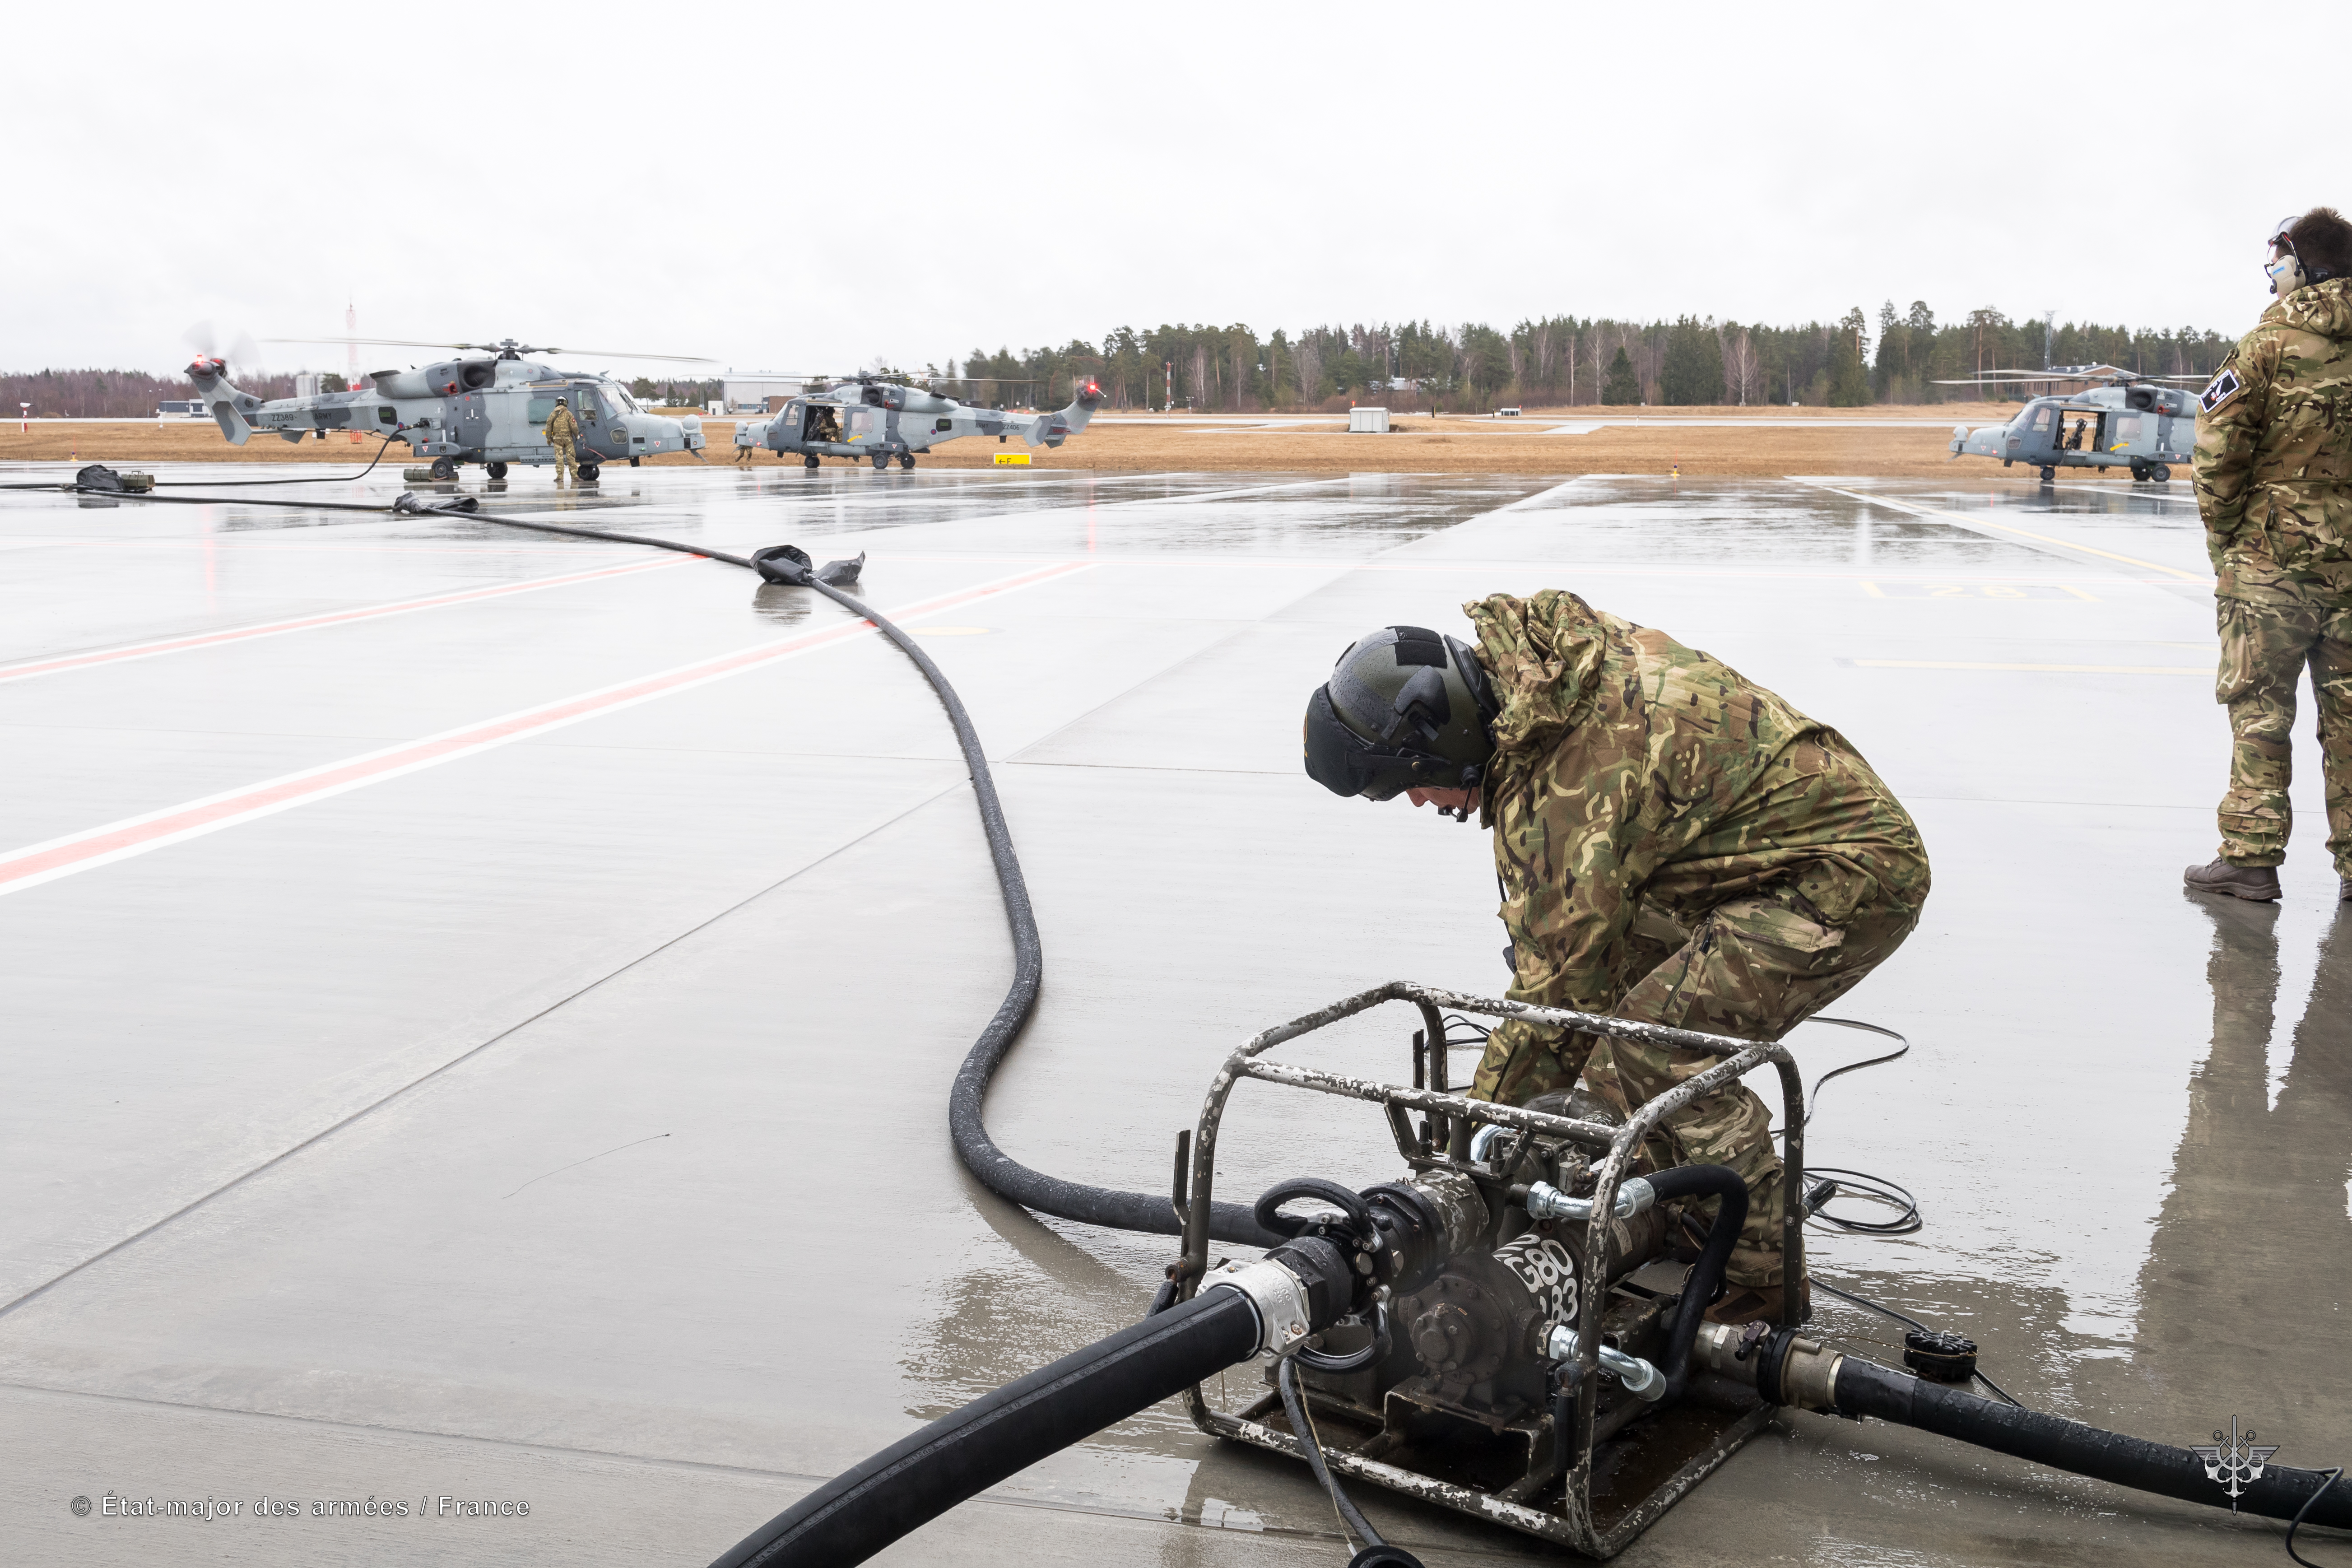 Pilot tends to refuelling pump with two helicopters on airfield.